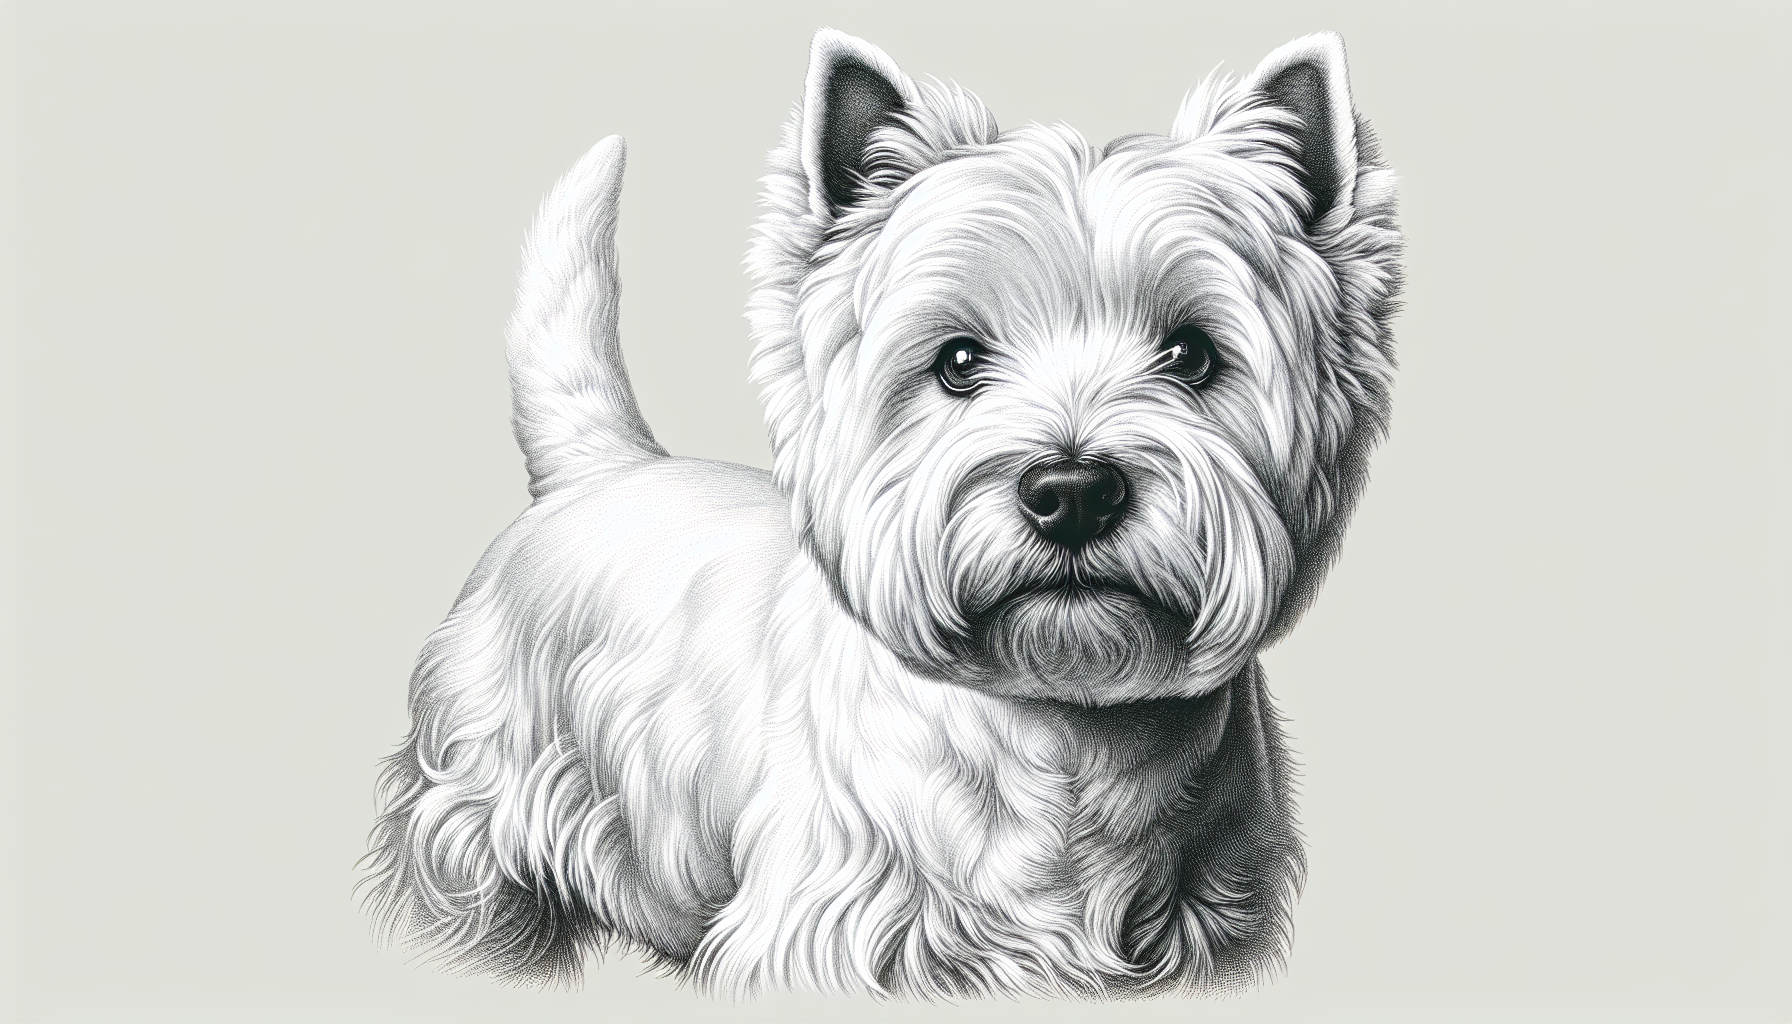 Illustration depicting the physical characteristics of a West Highland White Terrier